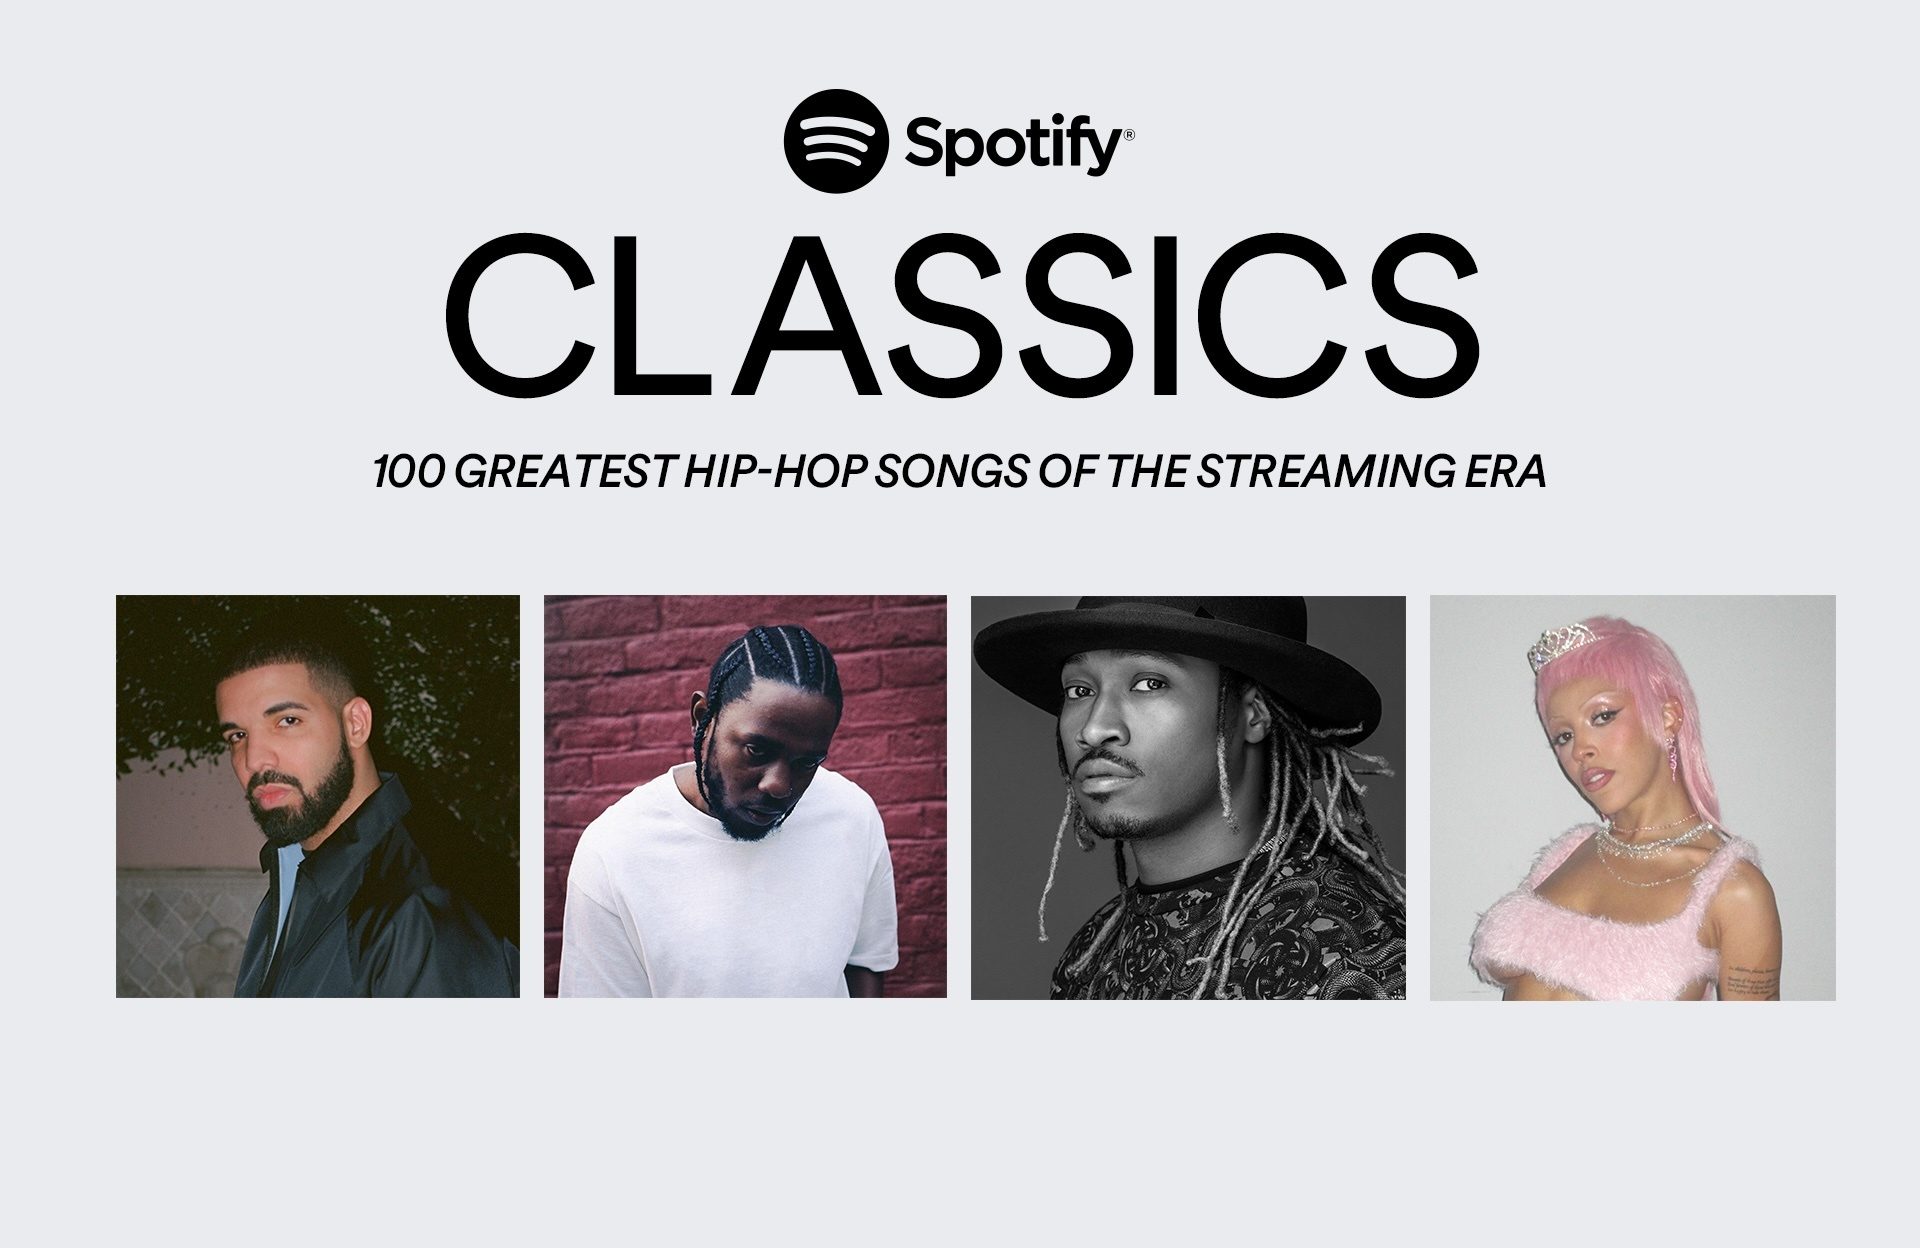 Spotify Releases ‘100 Greatest Hip-Hop Songs of the Streaming Era’ List #hiphop